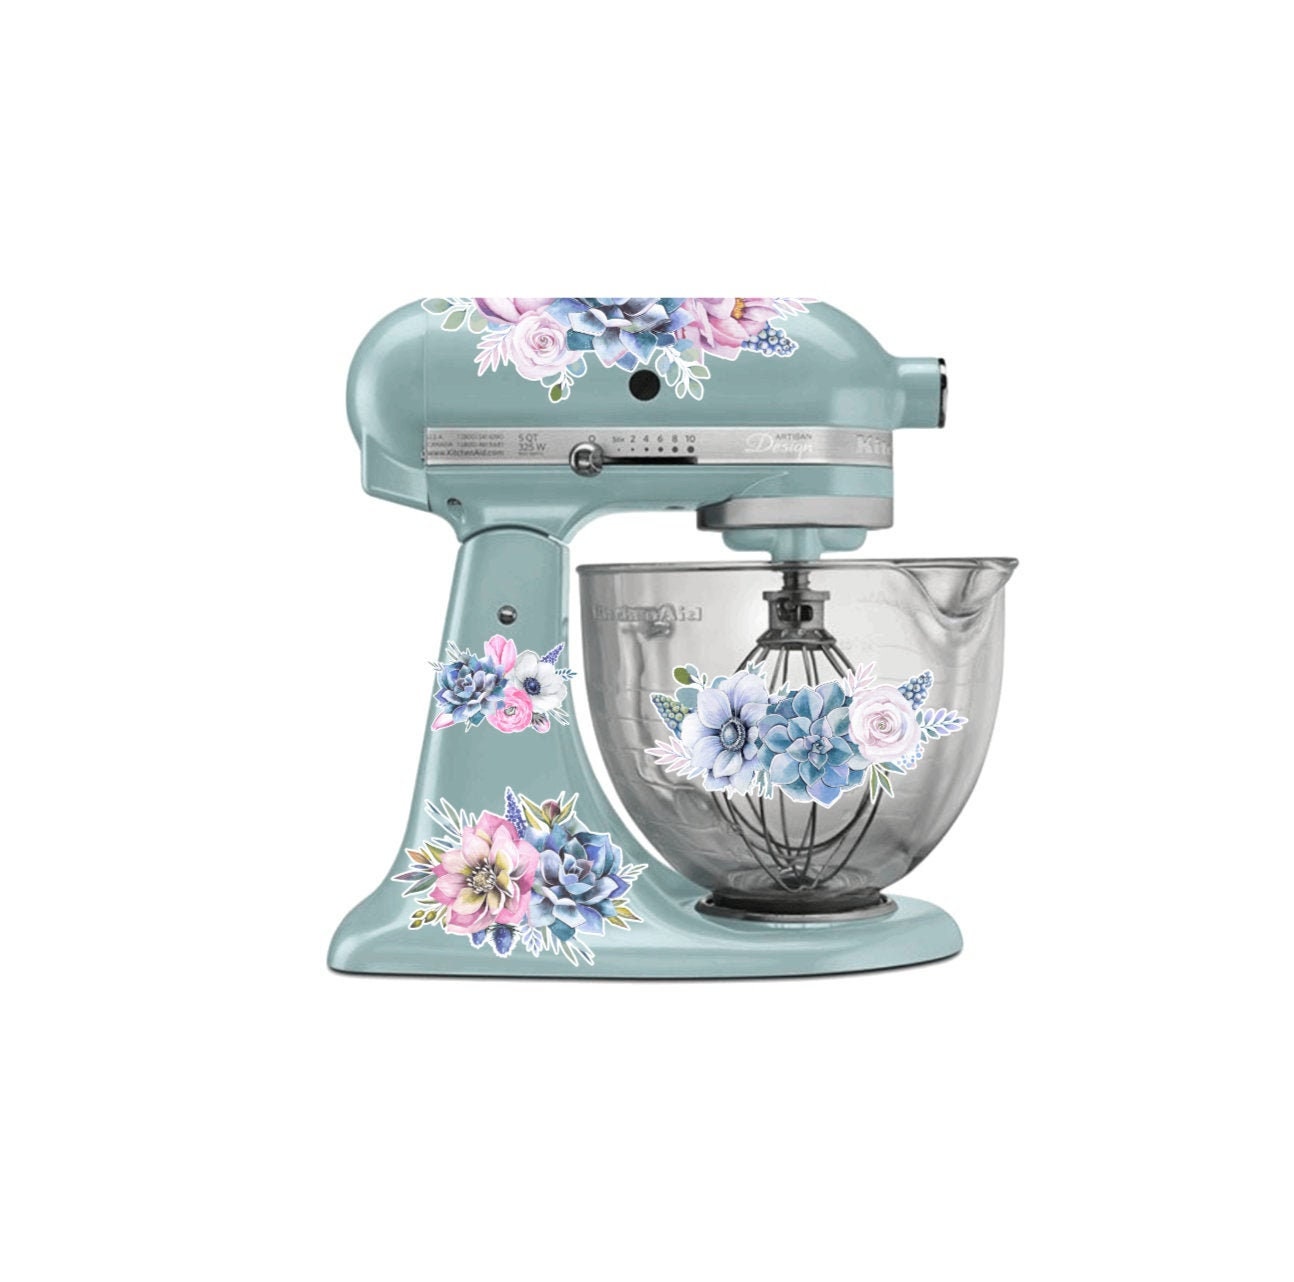 Red, Cream, Turquoise Floral Mixer Decals Featured in Pioneer